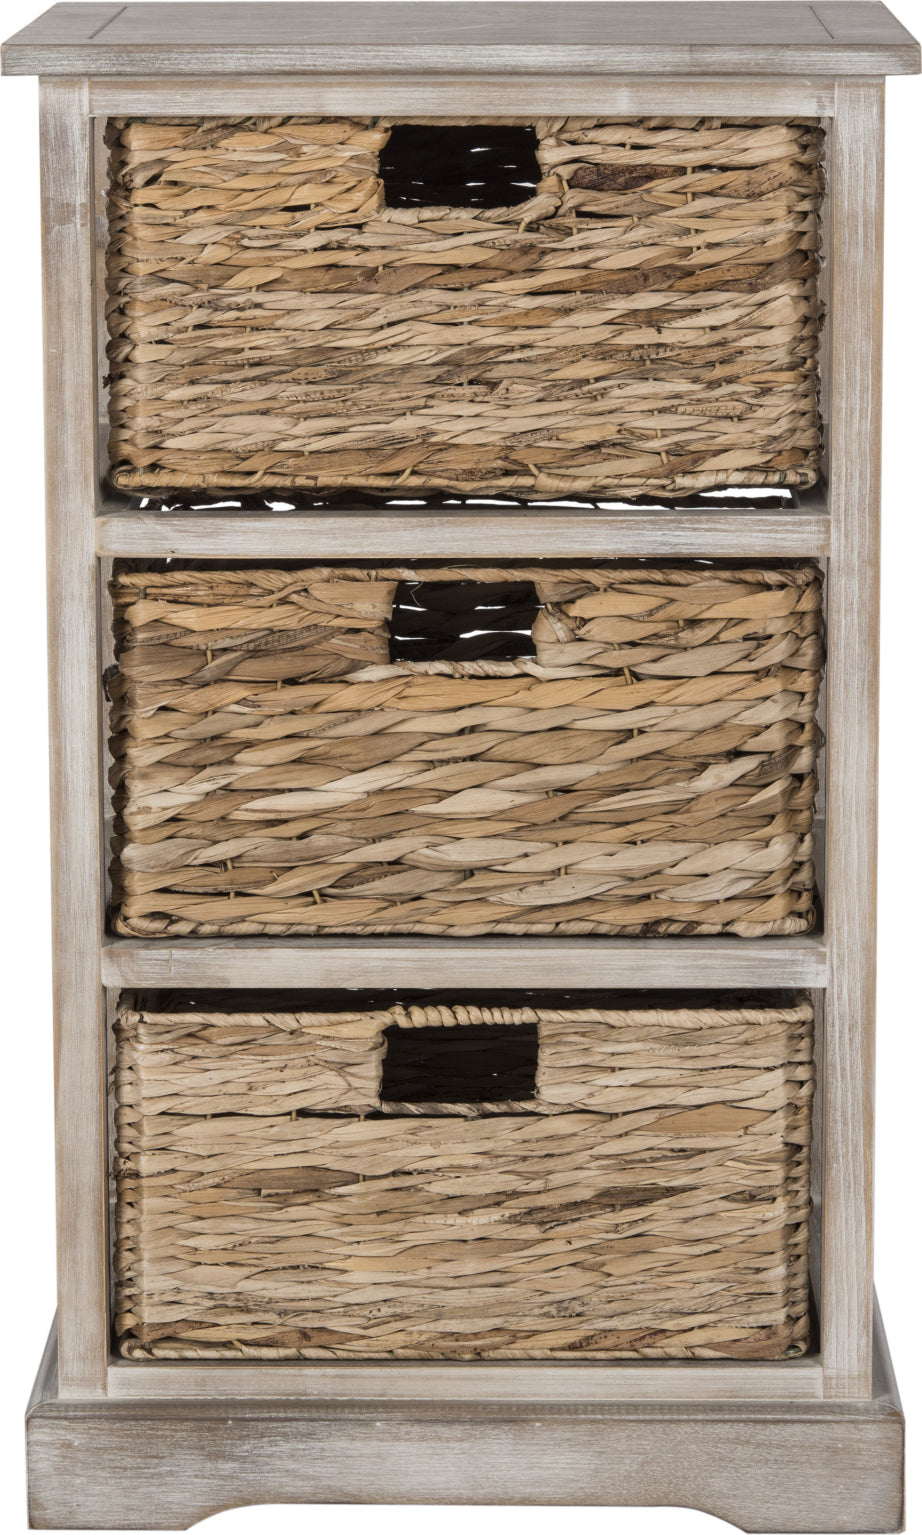 Cabinets, Chests & Tables with Basket Storage Drawers